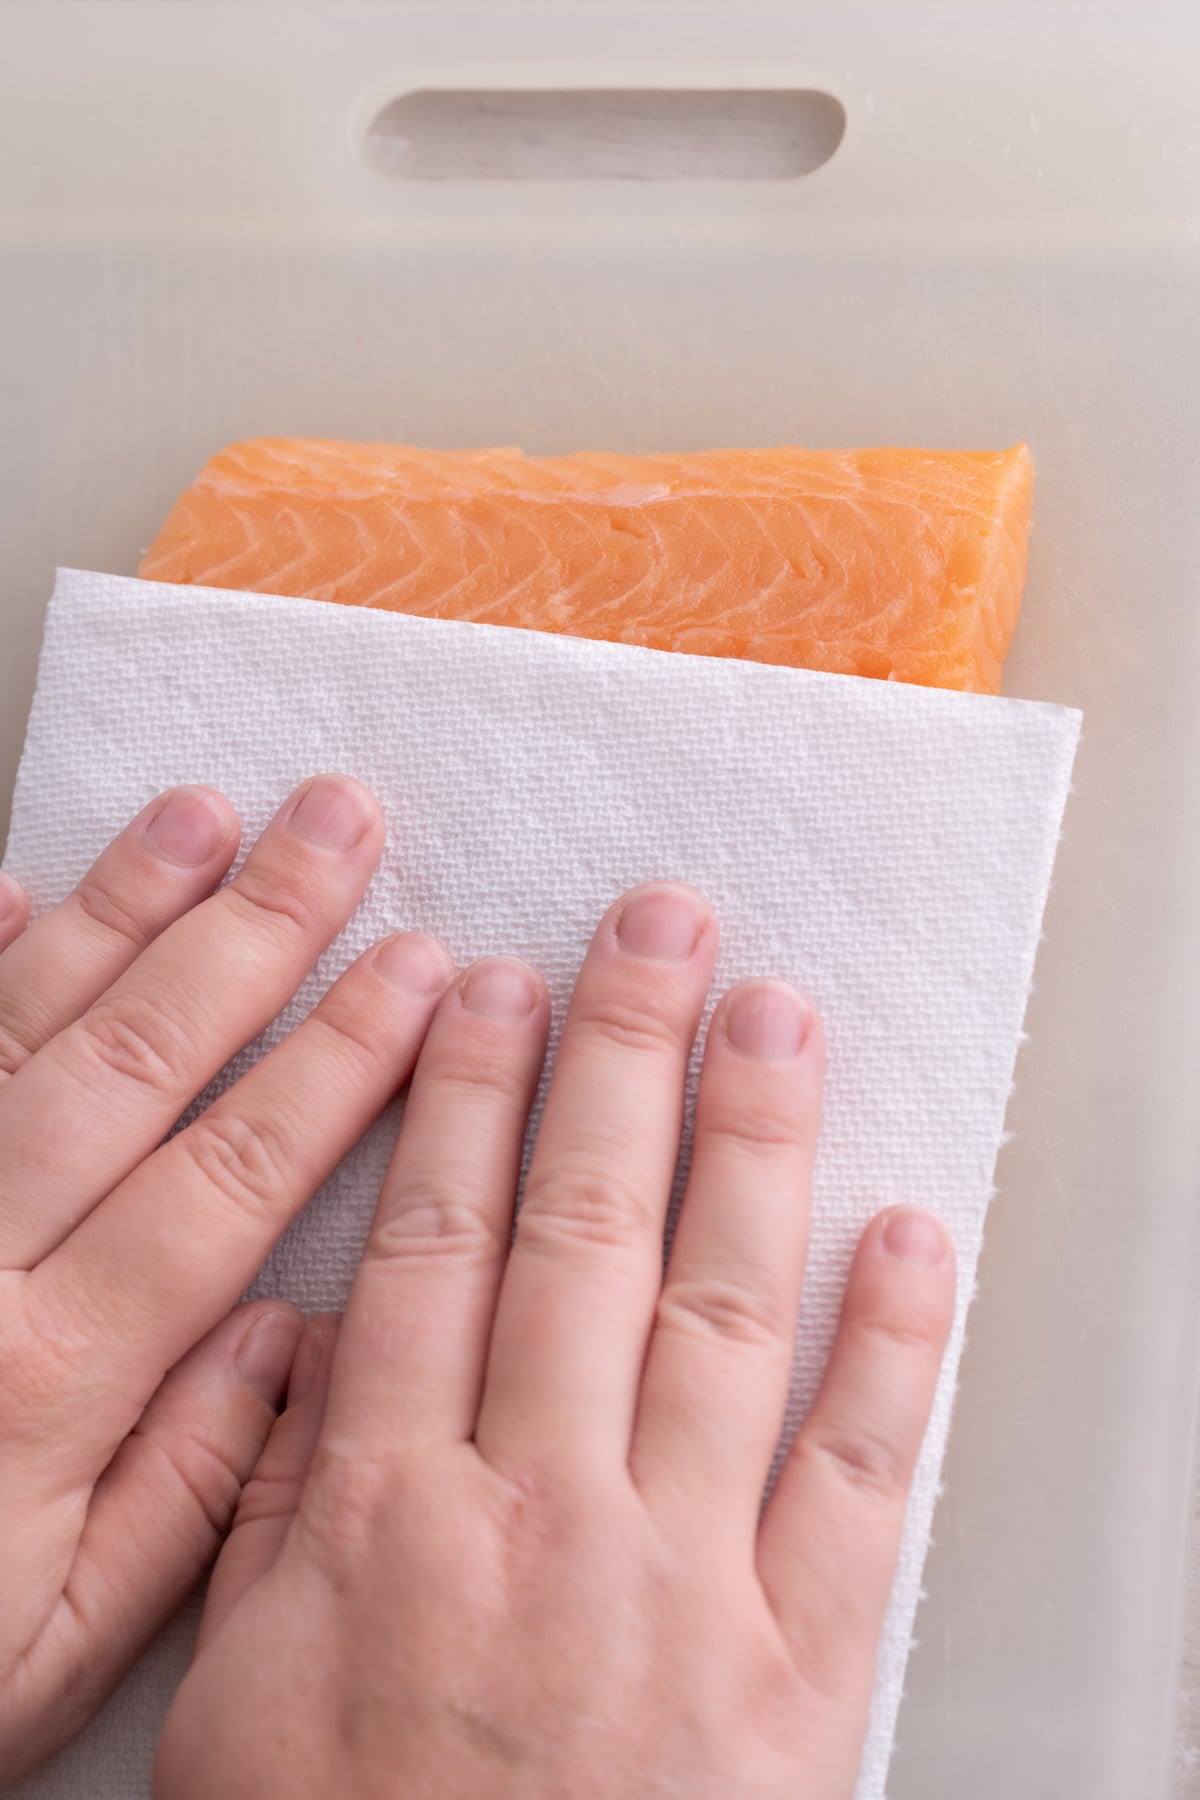 Patting dry a piece of skinless salmon